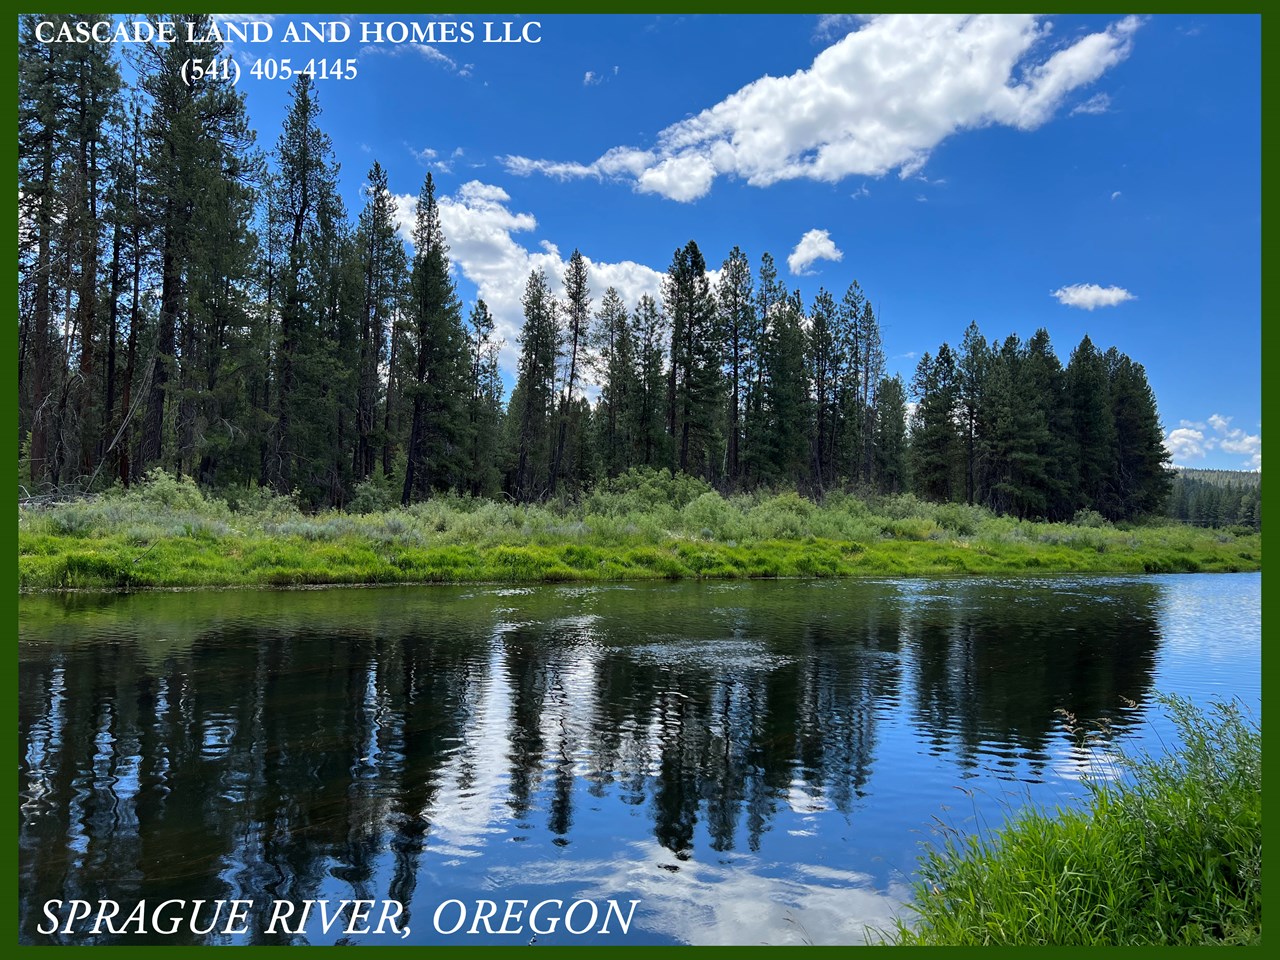 after meandering through the lush valleys and volcanic plateaus of the sprague river valley, the majestic sprague river joins the williamson river just southwest of chiloquin and flows into the upper klamath lake.